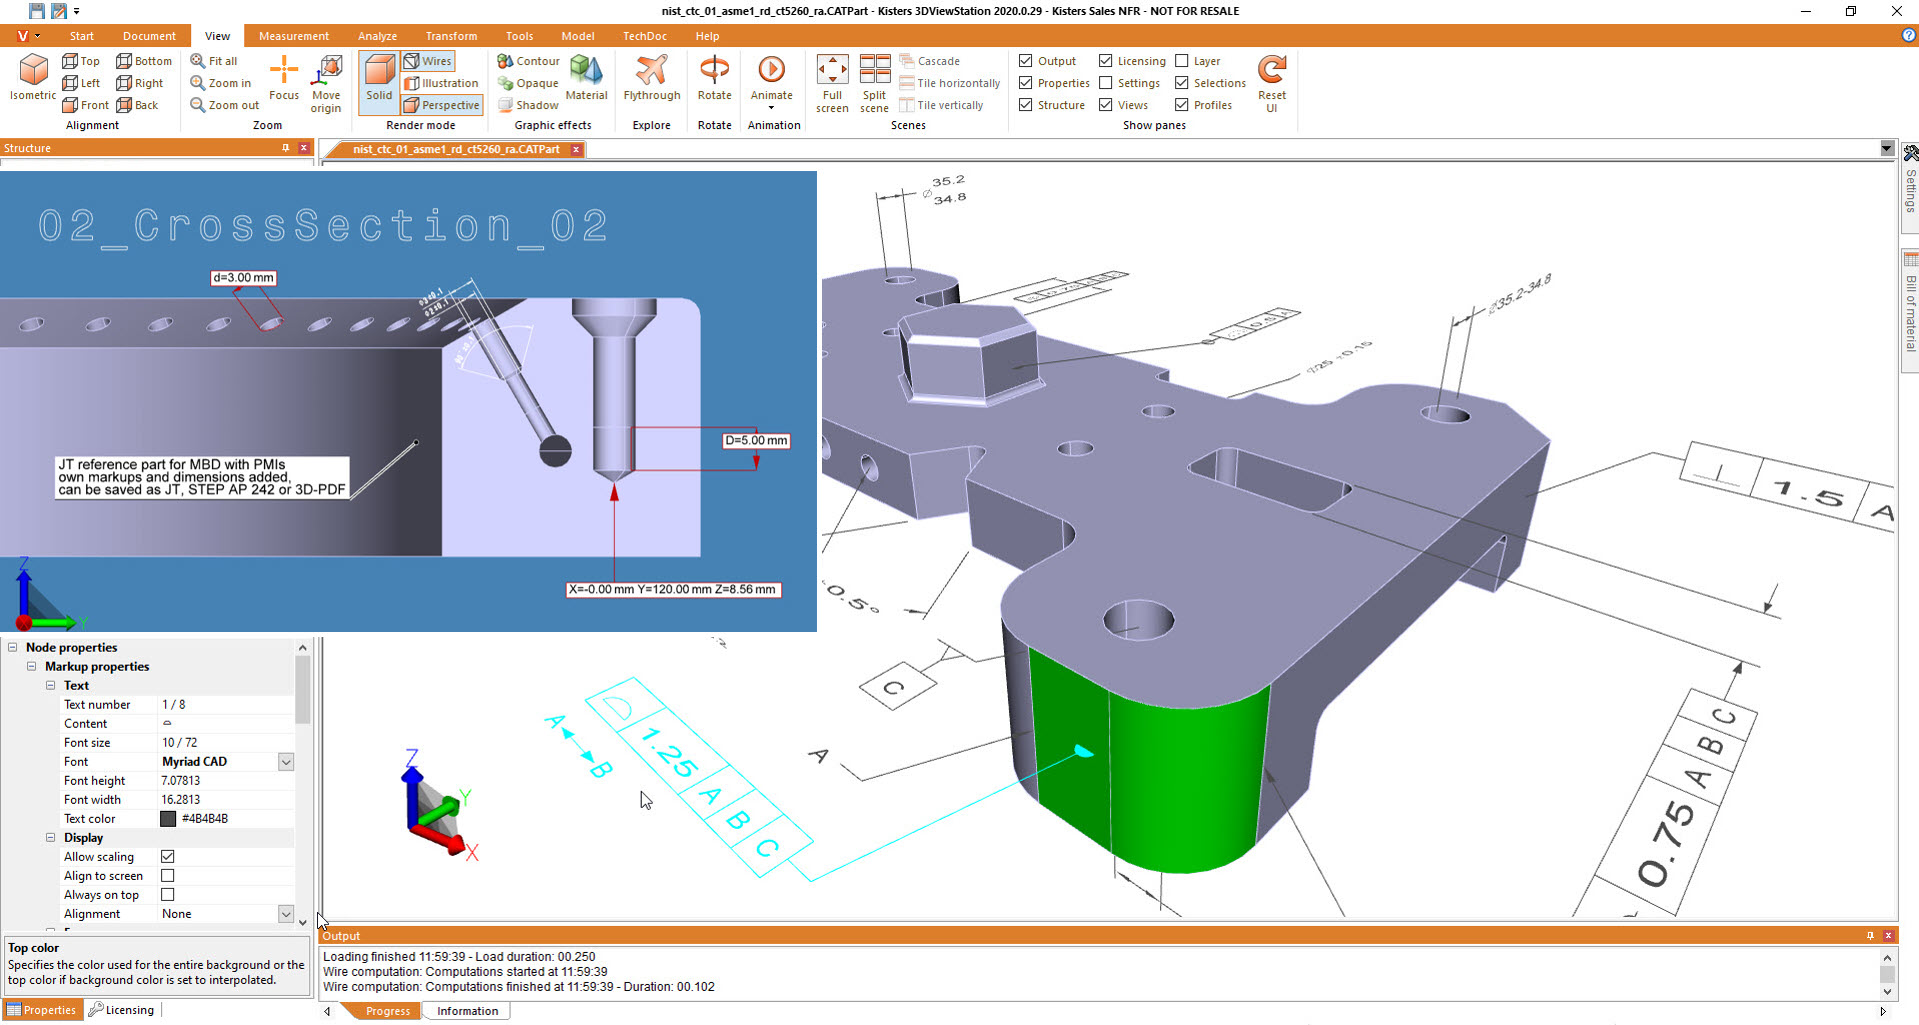 Kisters 3DViewStation supports MBD processes